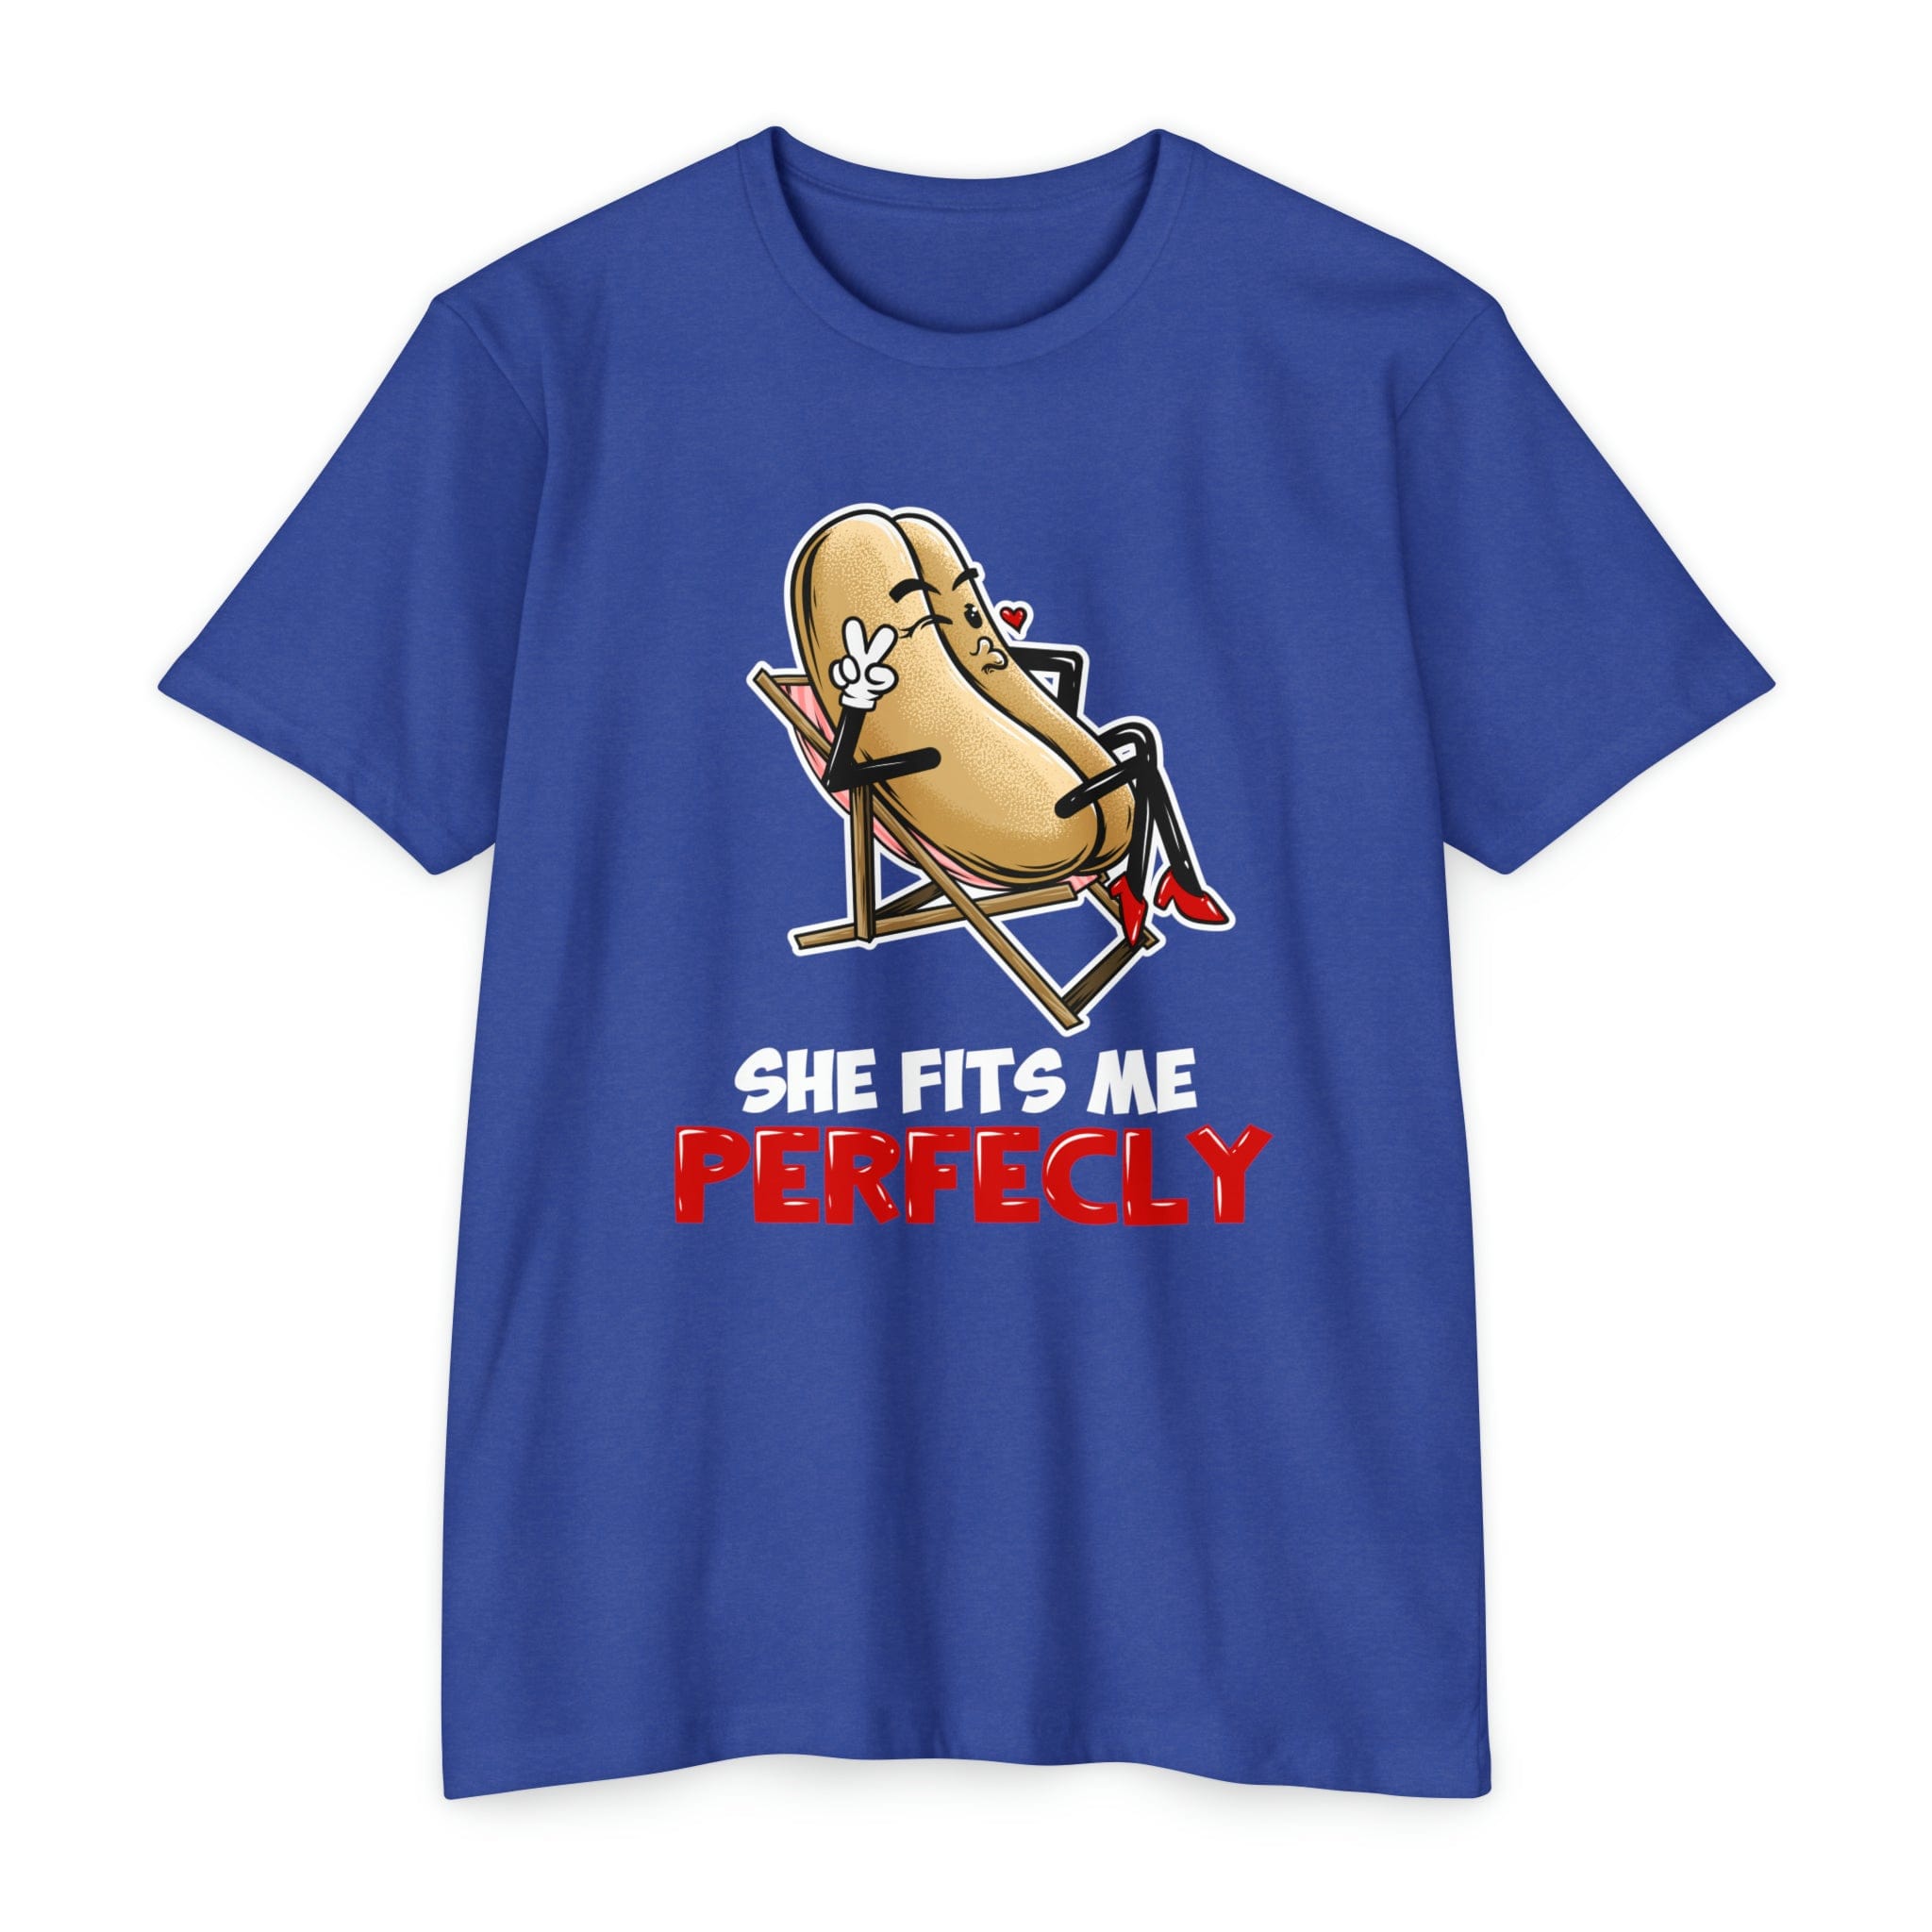 He/She Fits Me Perfectly & Funny Hot Dog Shirts